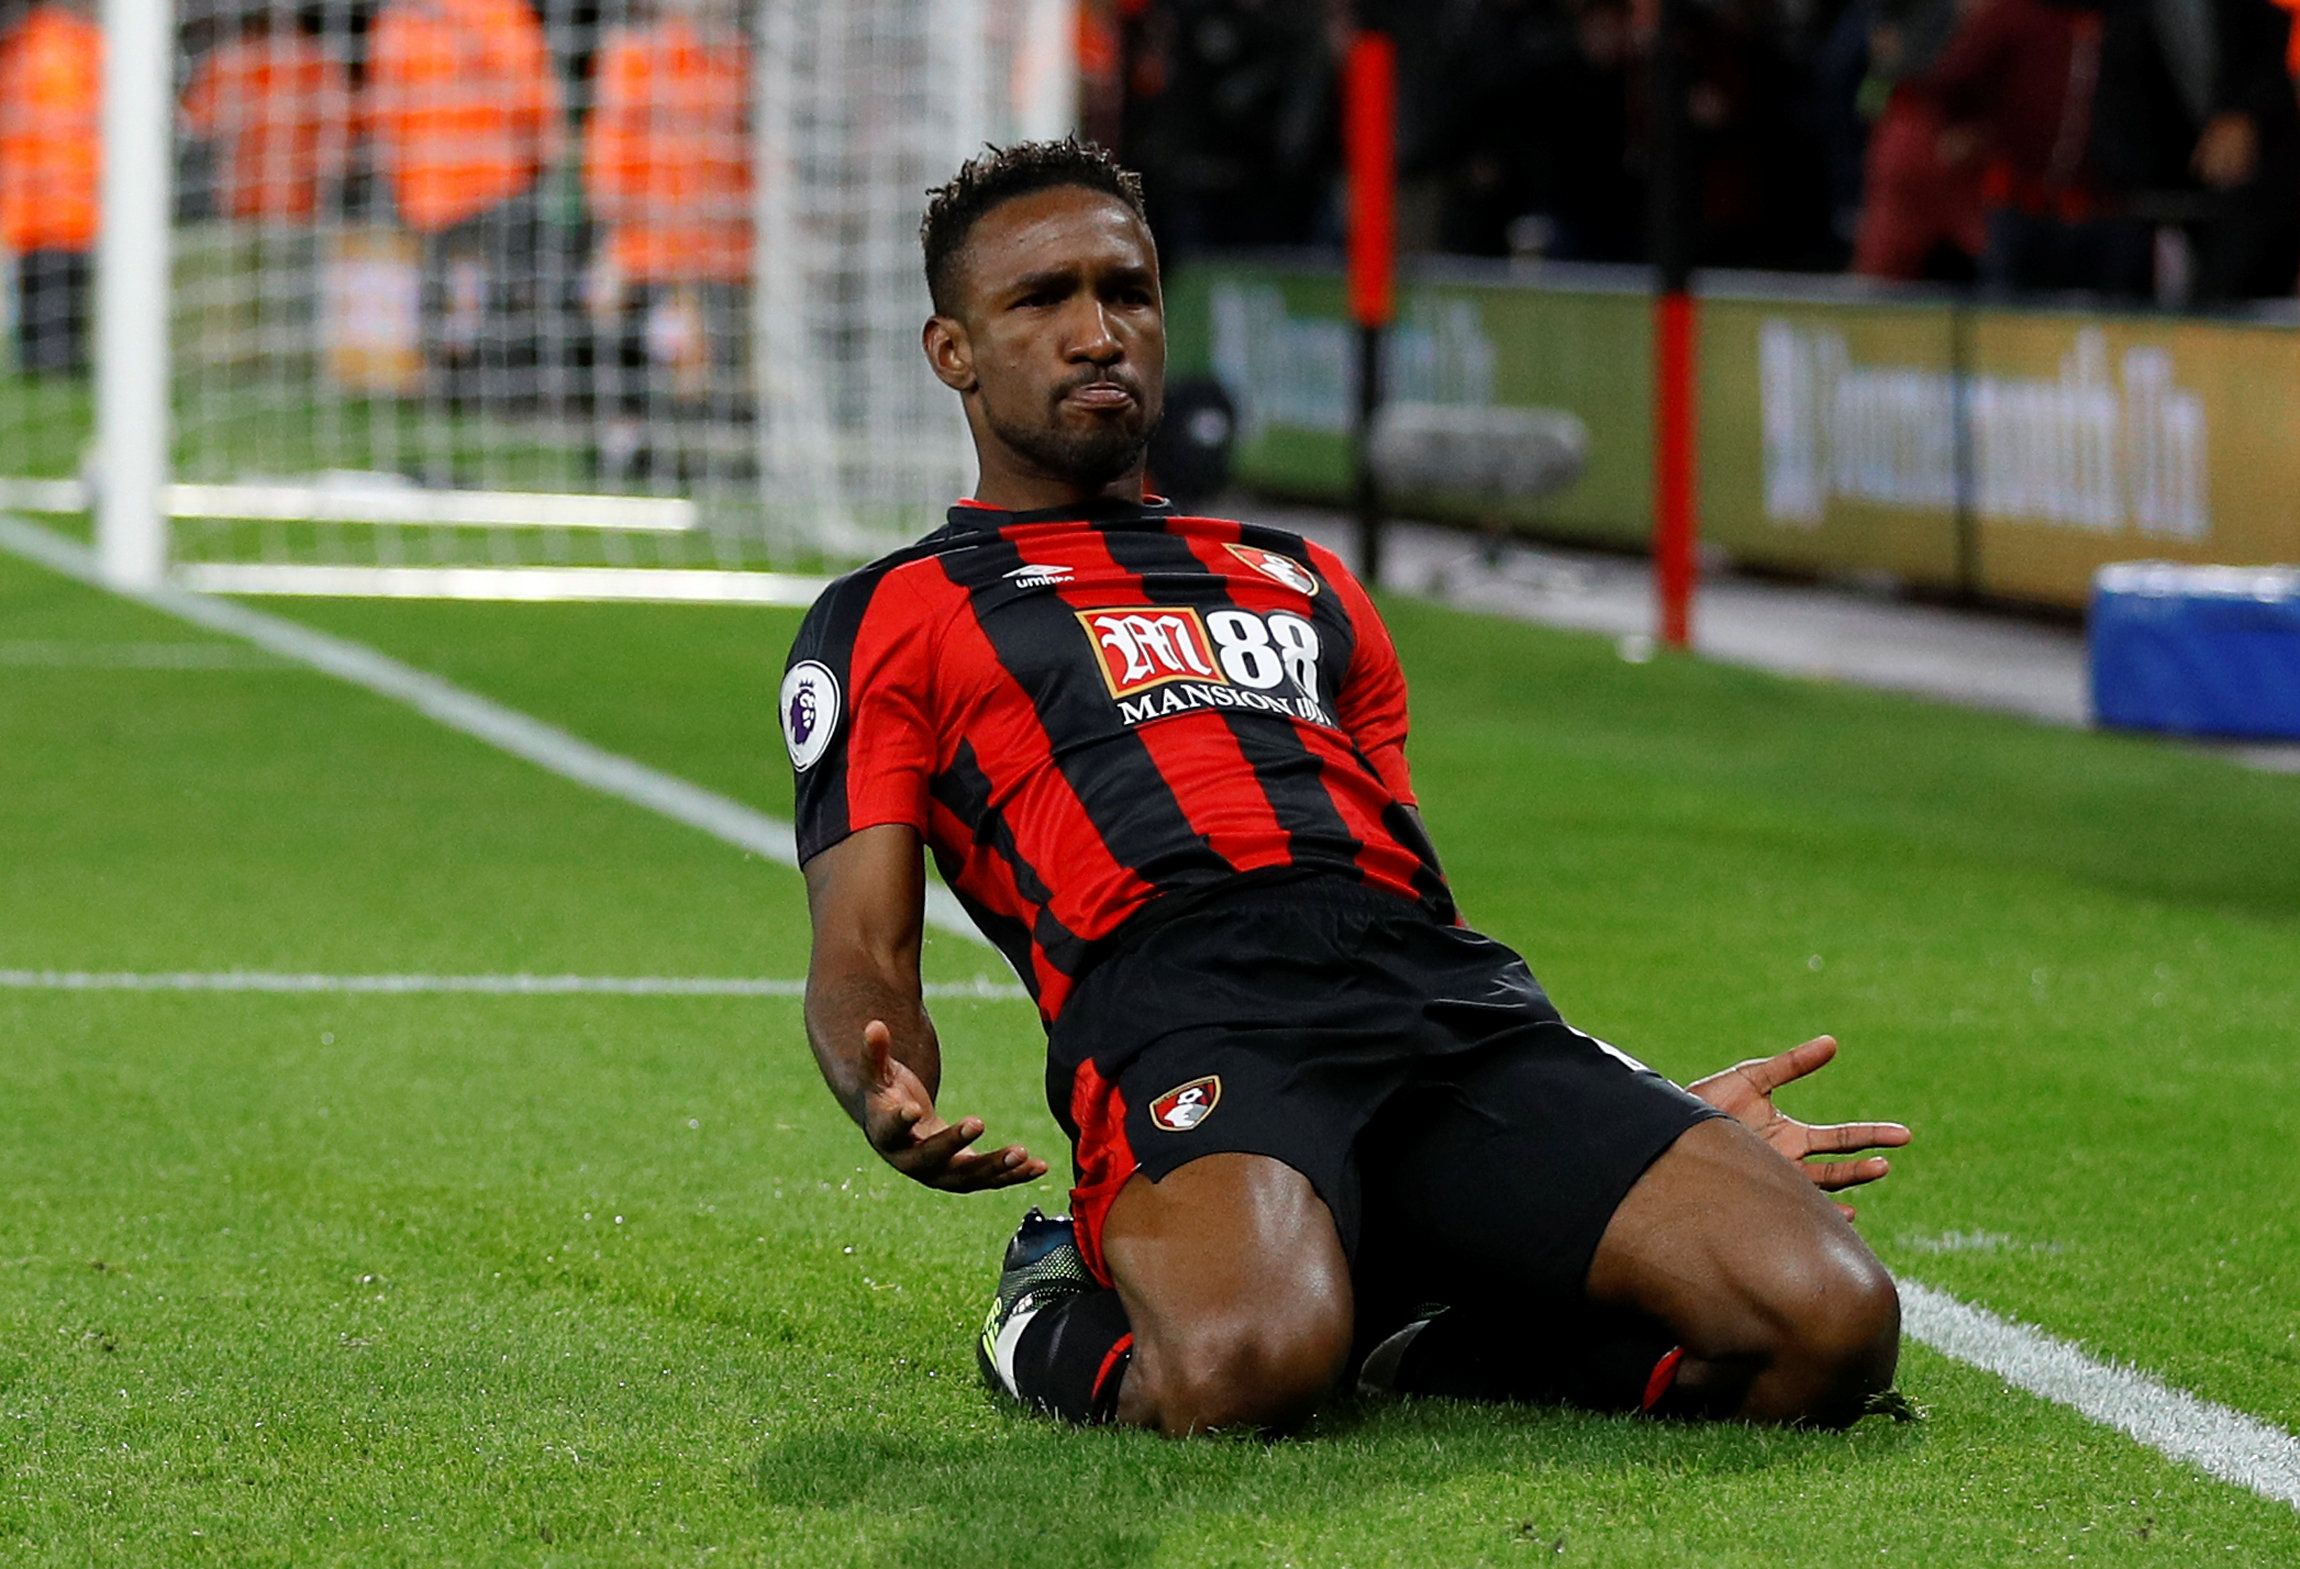 Soccer Football - Premier League - AFC Bournemouth vs Brighton &amp; Hove Albion- Vitality Stadium, Bournemouth, Britain - September 15, 2017   Bournemouth's Jermain Defoe celebrates scoring their second goal    REUTERS/Peter Nicholls      EDITORIAL USE ONLY. No use with unauthorized audio, video, data, fixture lists, club/league logos or 